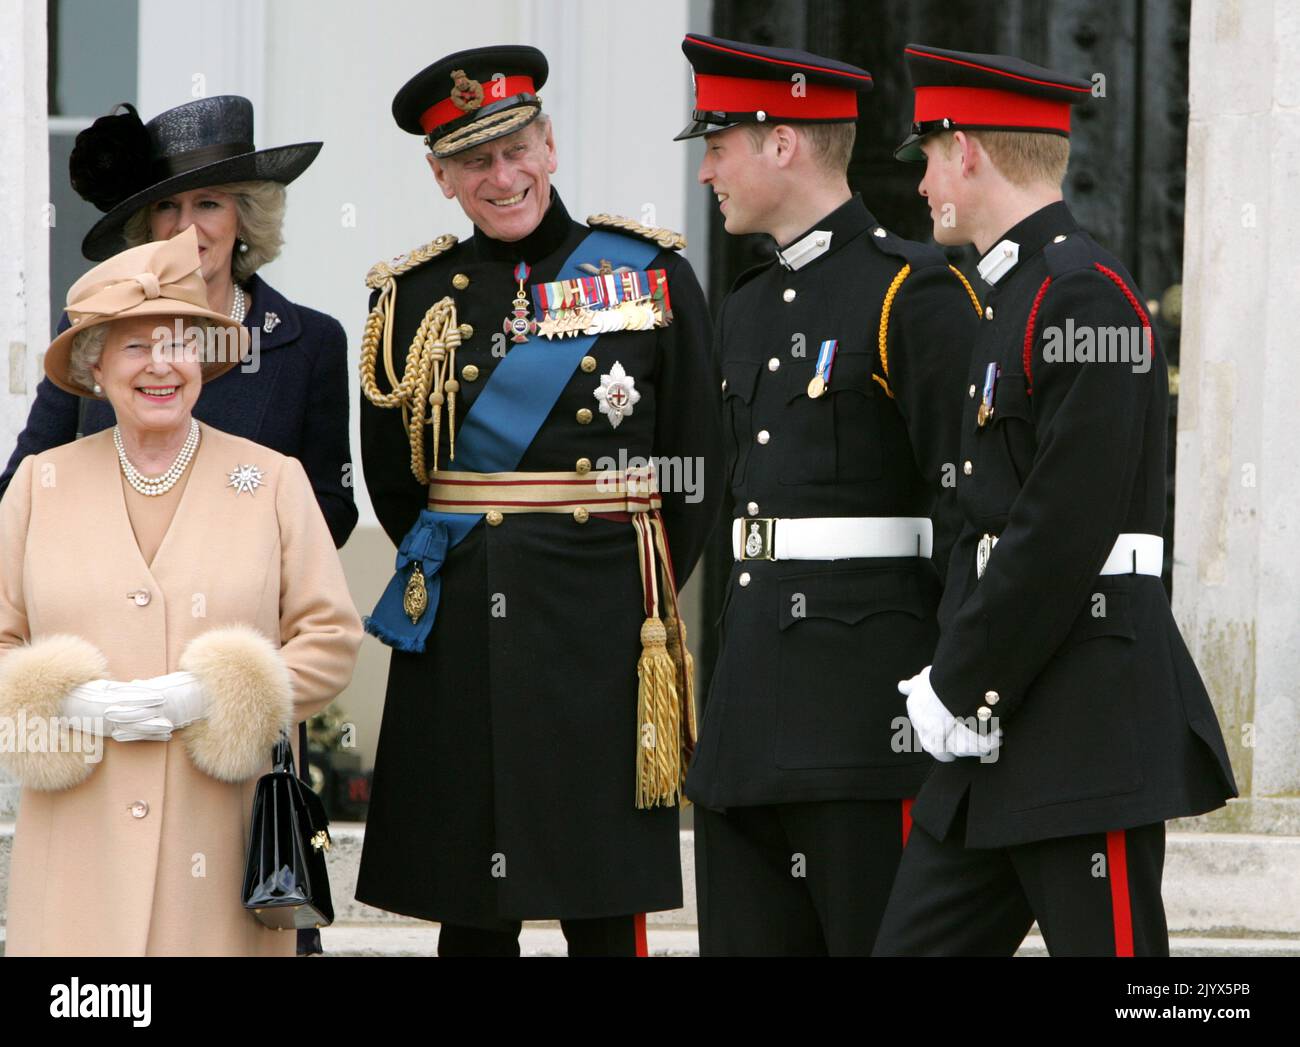 File photo dated 12/04/2006 of Queen Elizabeth II, The Duchess of Cornwall (behind), the Duke of Edinburgh, Prince William and Prince Harry at Sandhurst Royal Military Academy after The Sovereign's Parade that marked the completion of Prince Harry's Officer training. The Queen died peacefully at Balmoral this afternoon, Buckingham Palace has announced. Issue date: Thursday September 8, 2022. Stock Photo